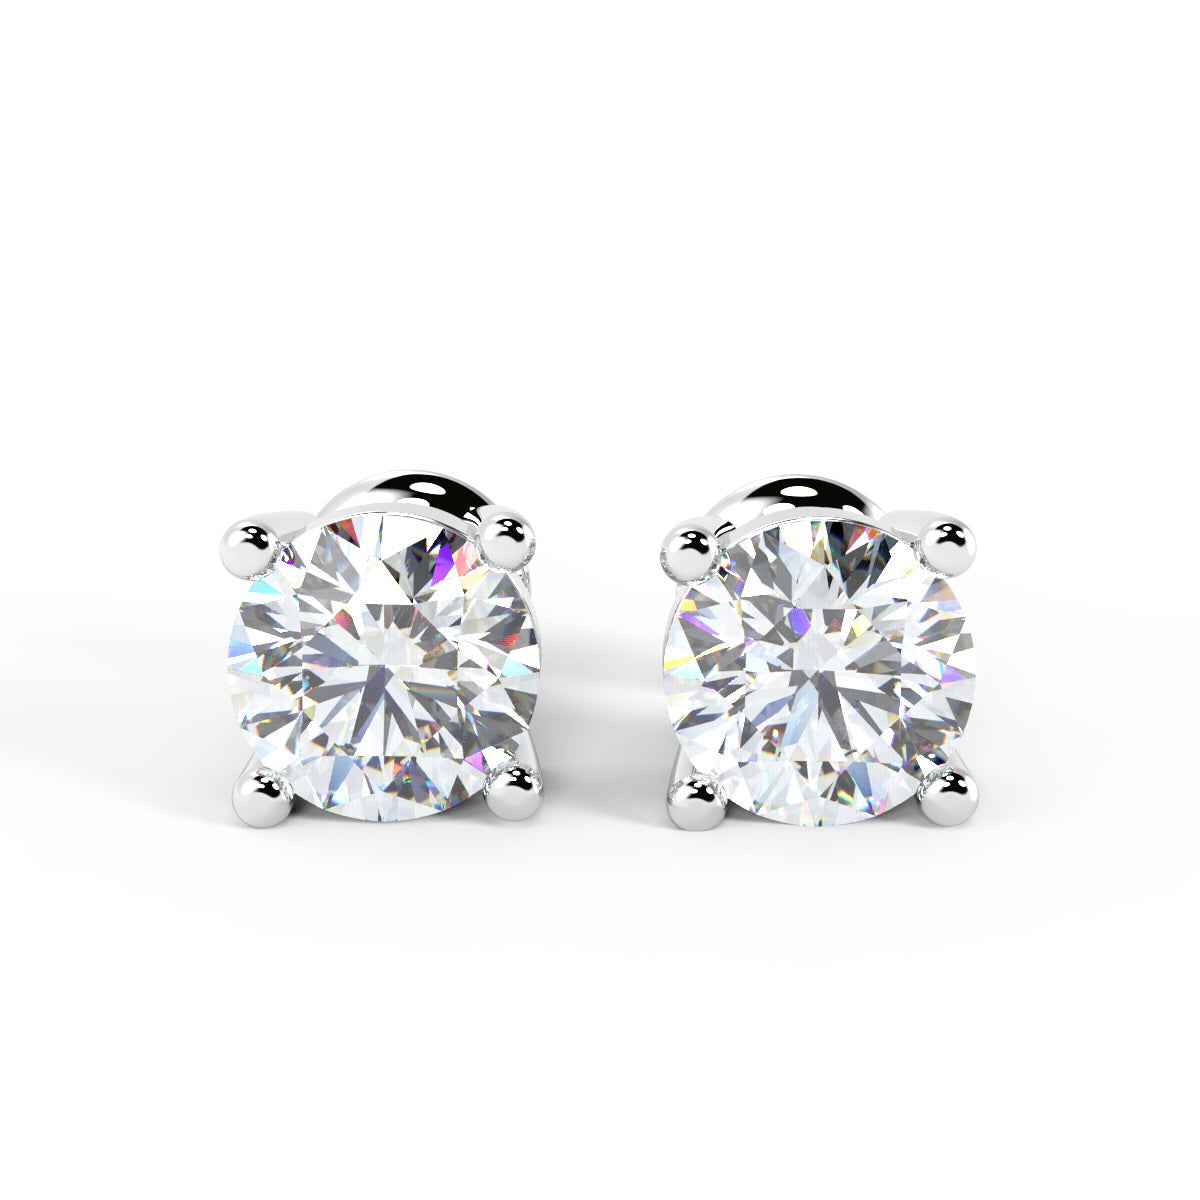 Special Offer ! F/VS-SI 1.00Ct Diamond Stud Earrings in Platinum / Gold